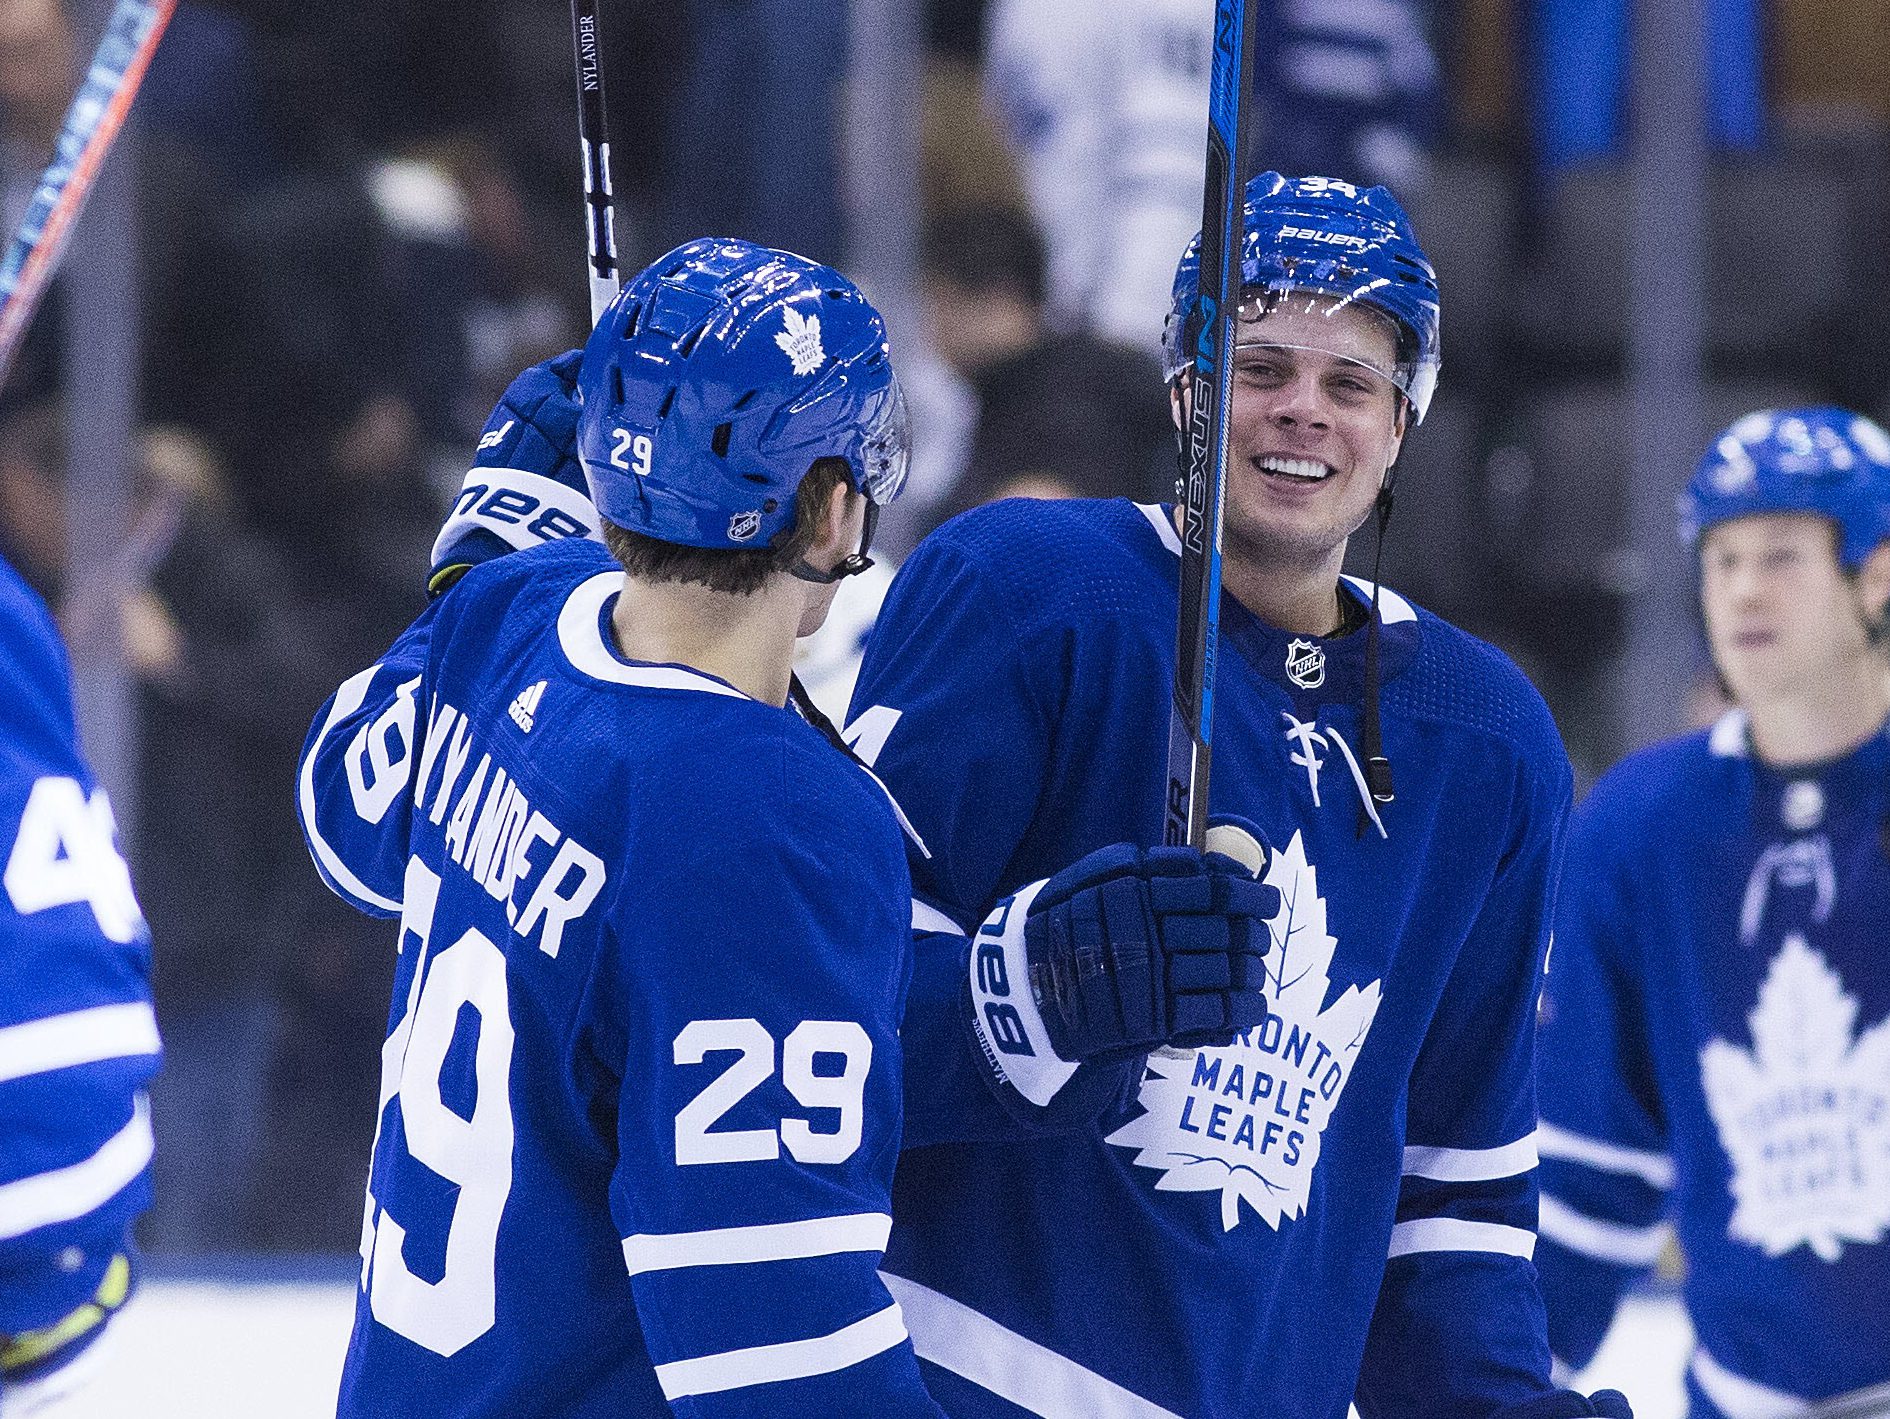 Swede victory: Nylander, Johnsson lead Maple Leafs to win over ...